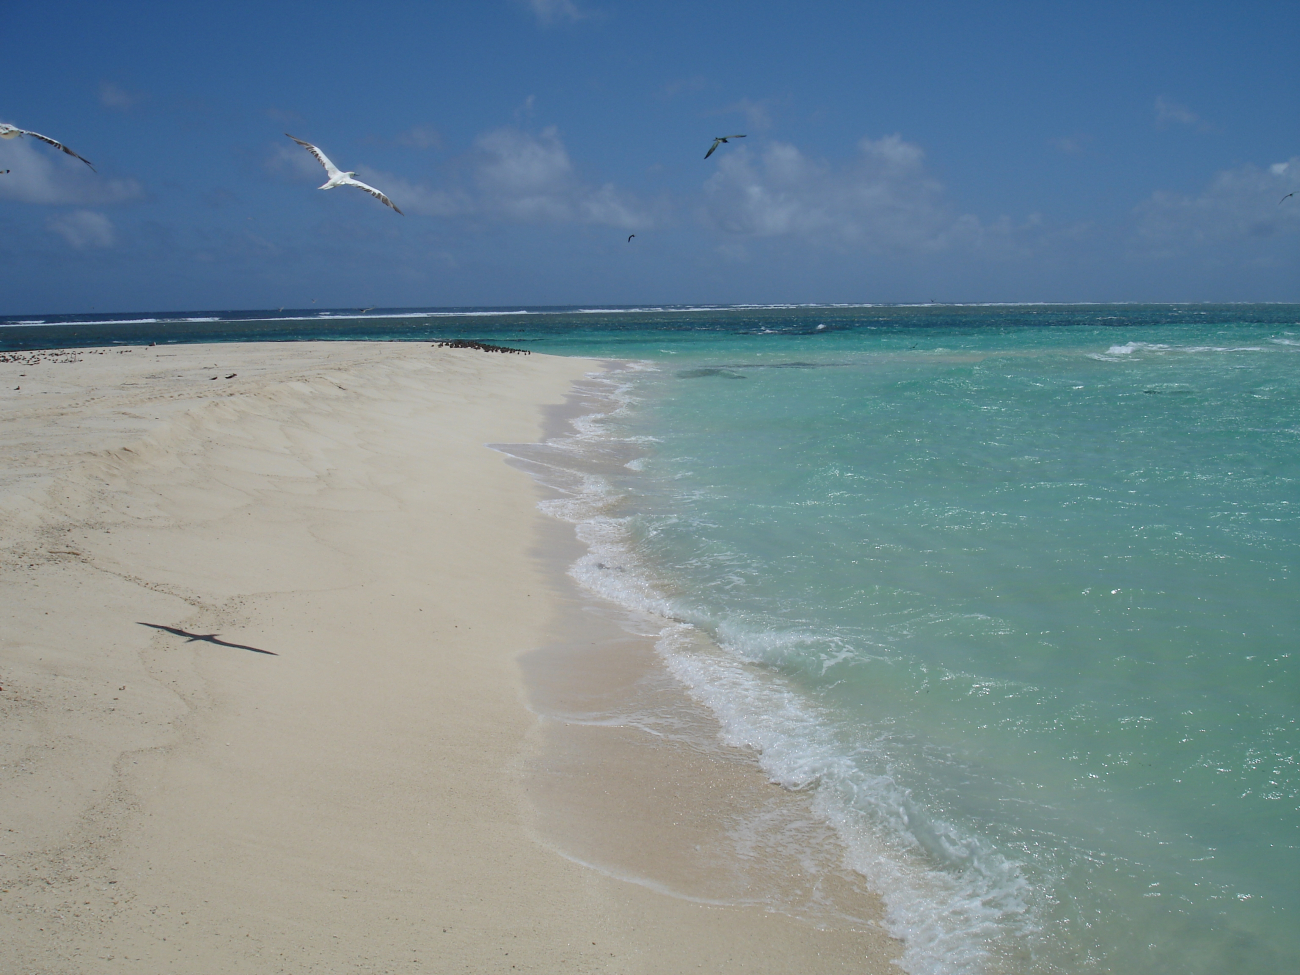 White sands, emerald seas, and graceful birds